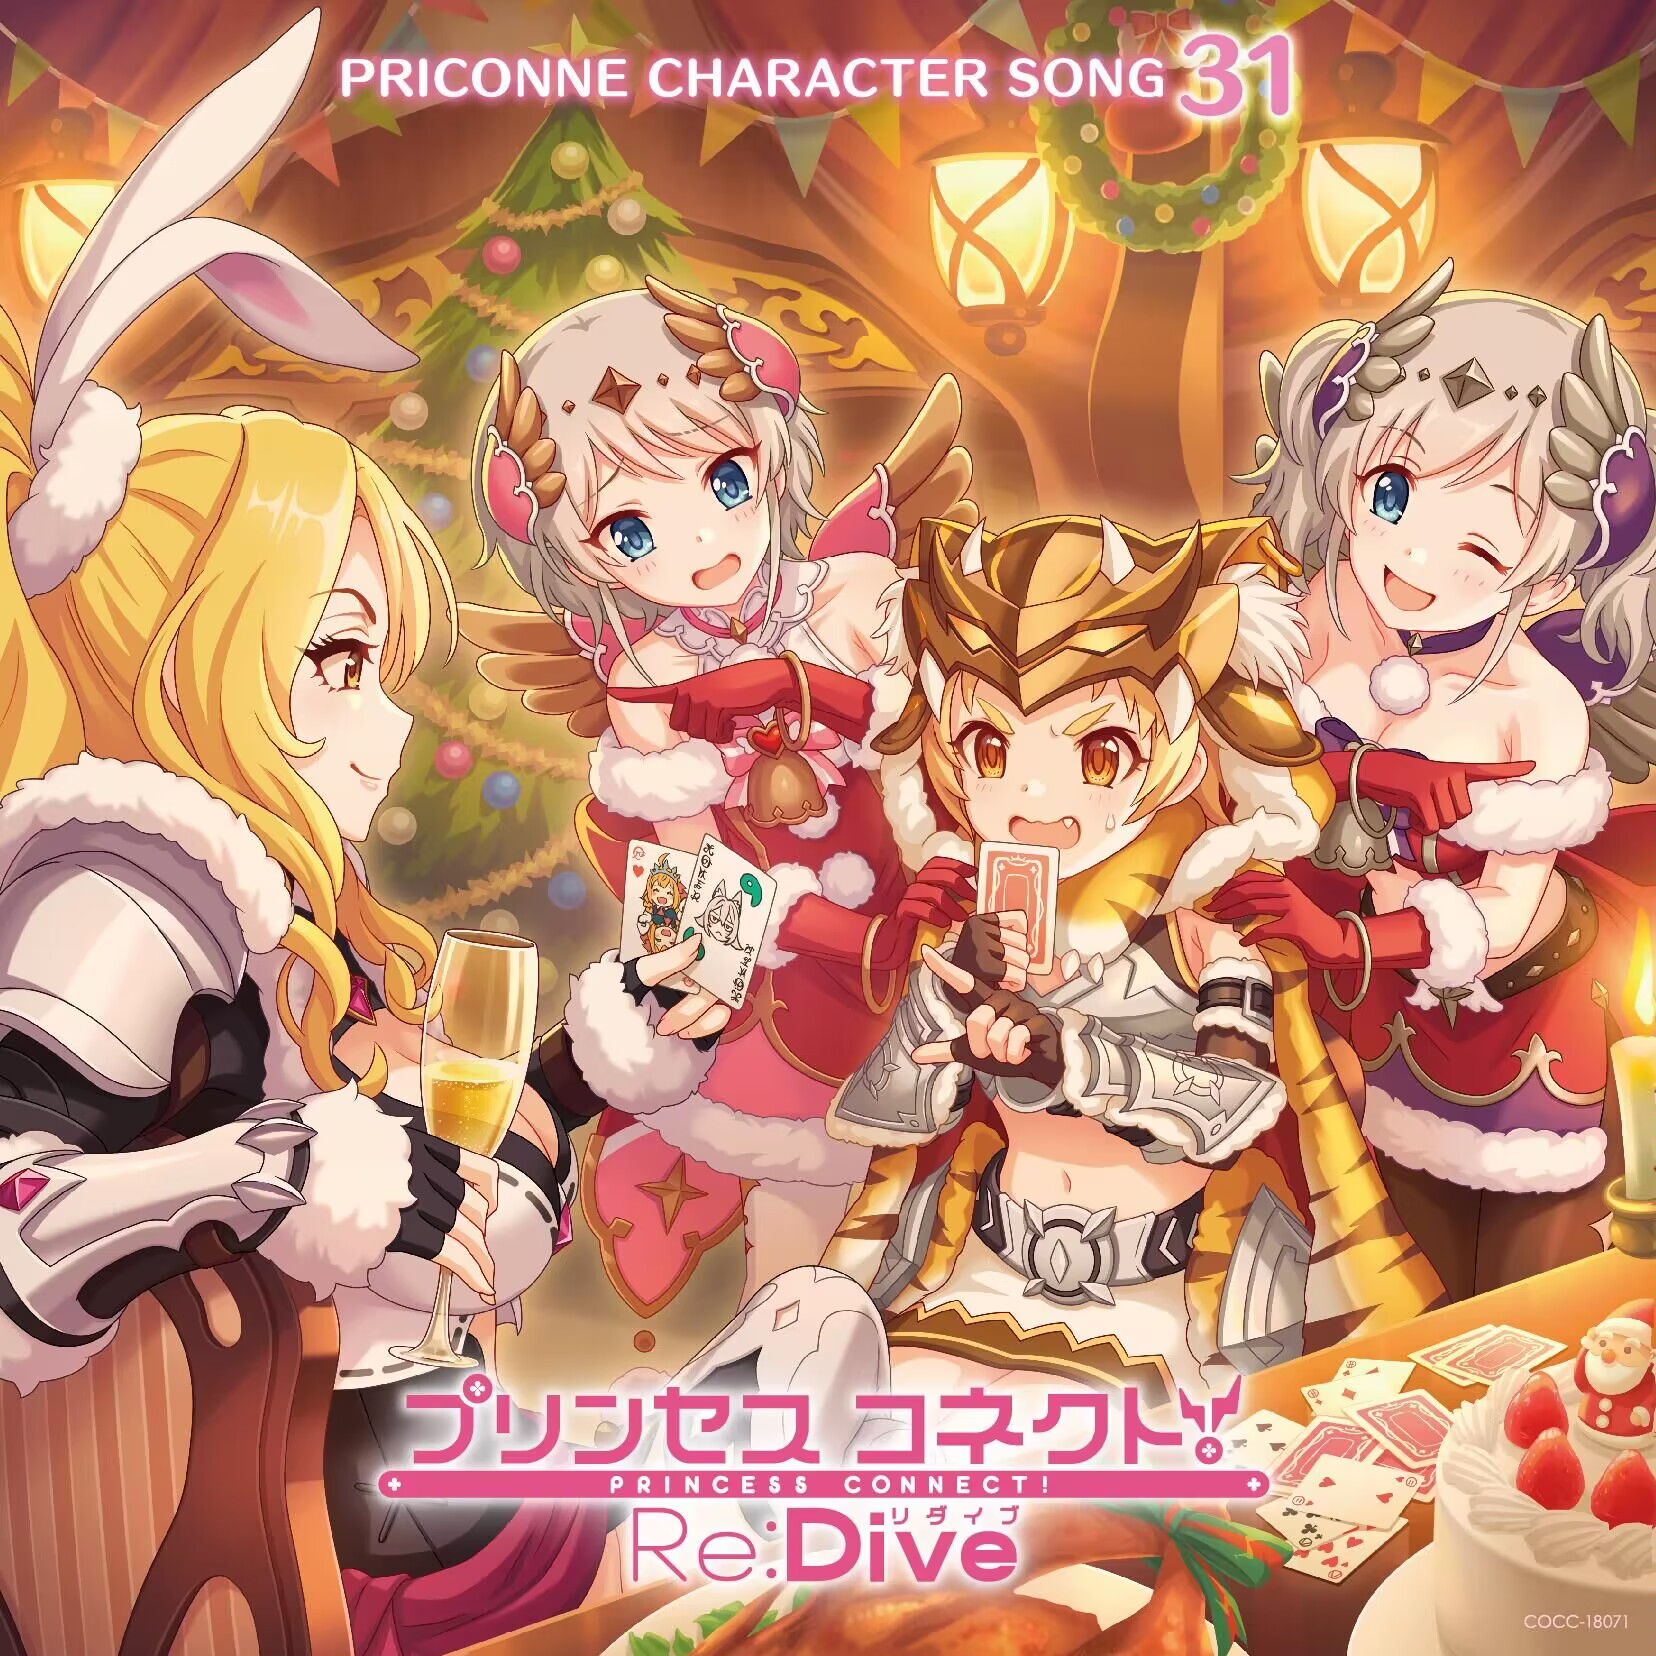 PRICONNE CHARACTER SONG 31.jpg